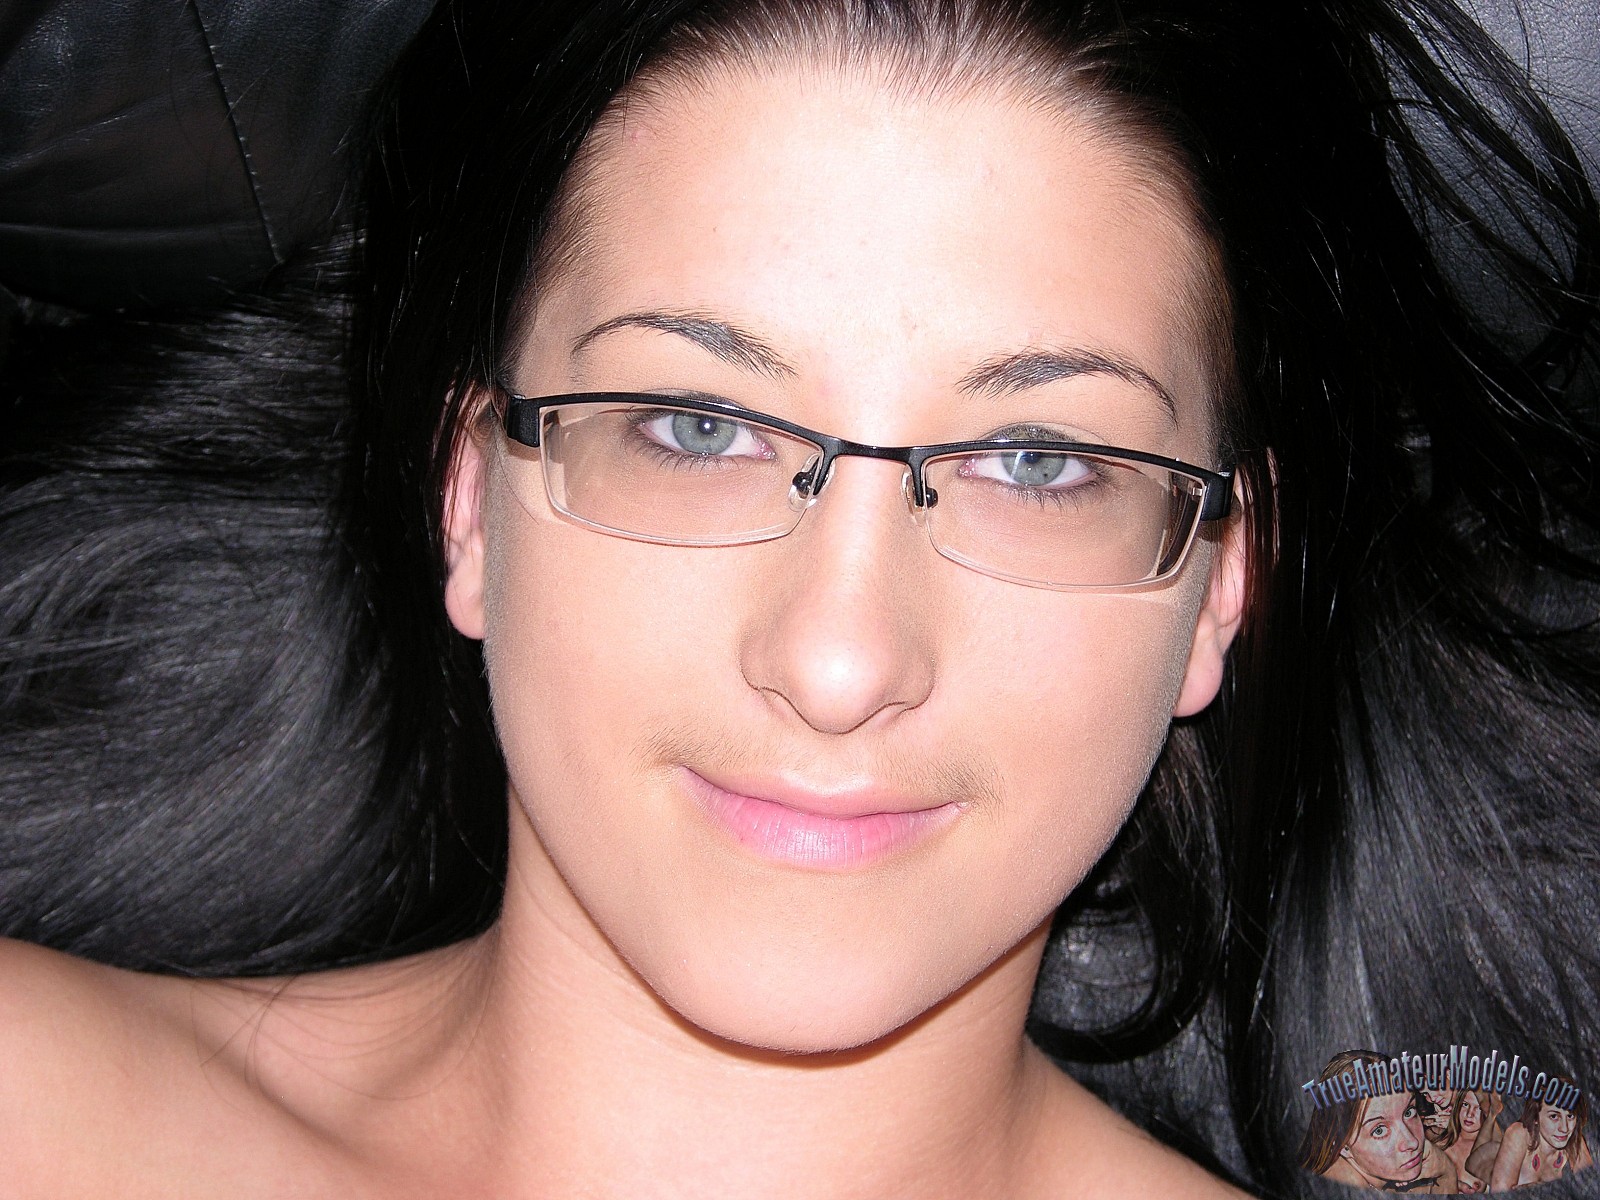 Sexy Girls wearing Glasses Page 286 Freeones Forum photo